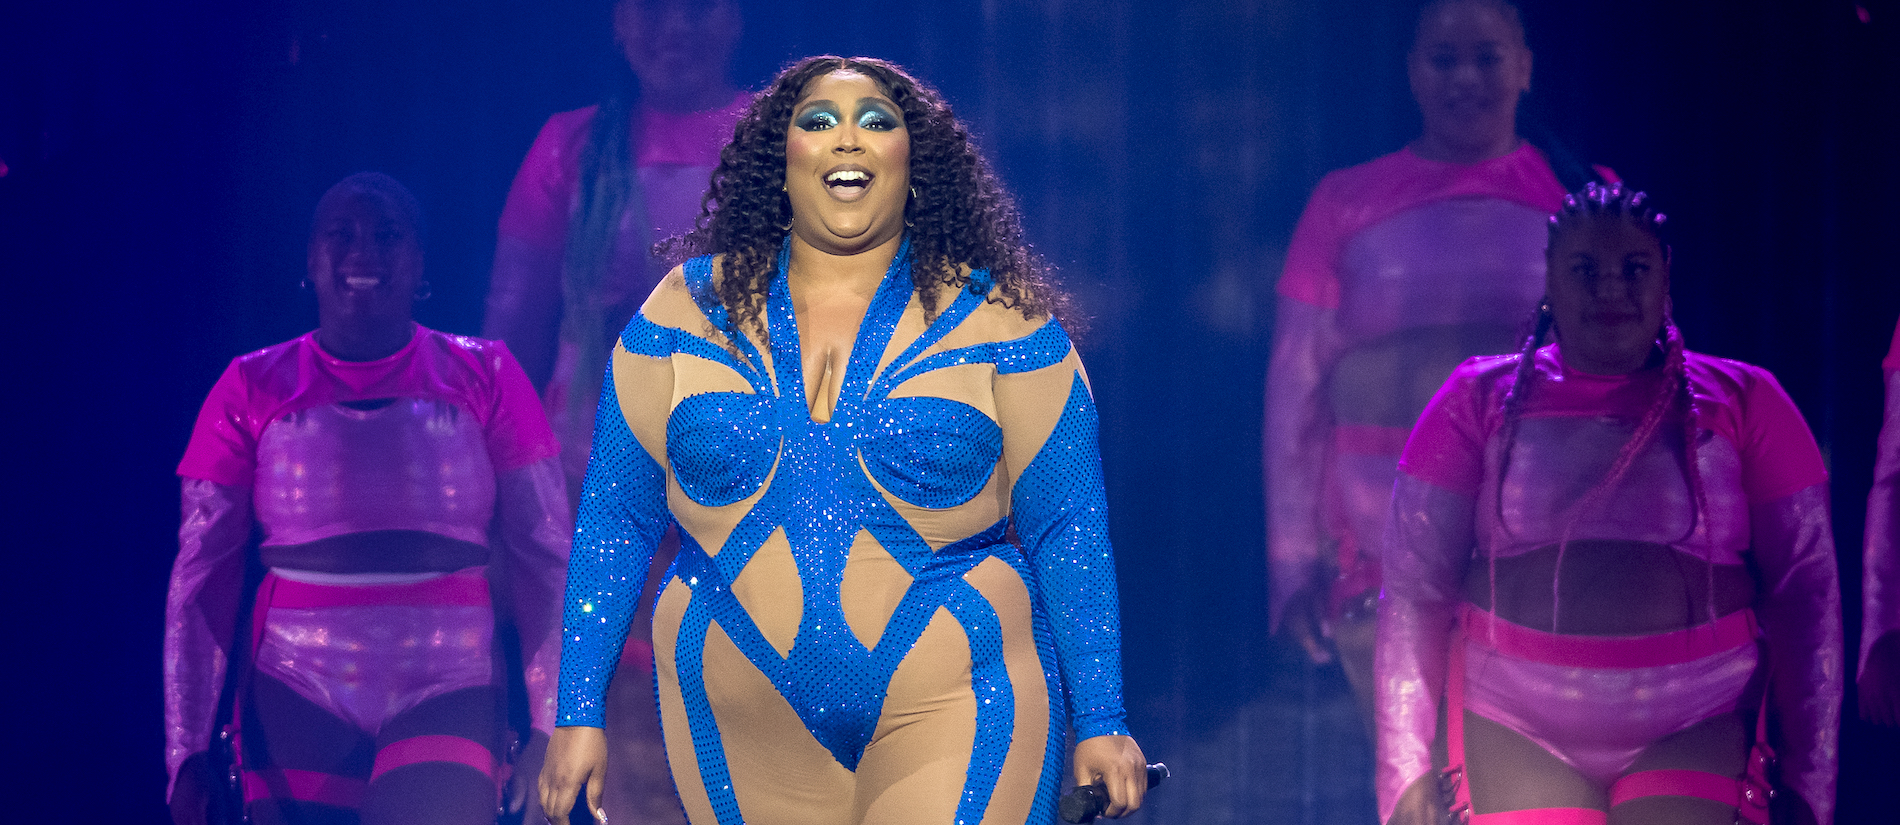 What Is Lizzo's Setlist Of Songs For ‘The Special Tour?'